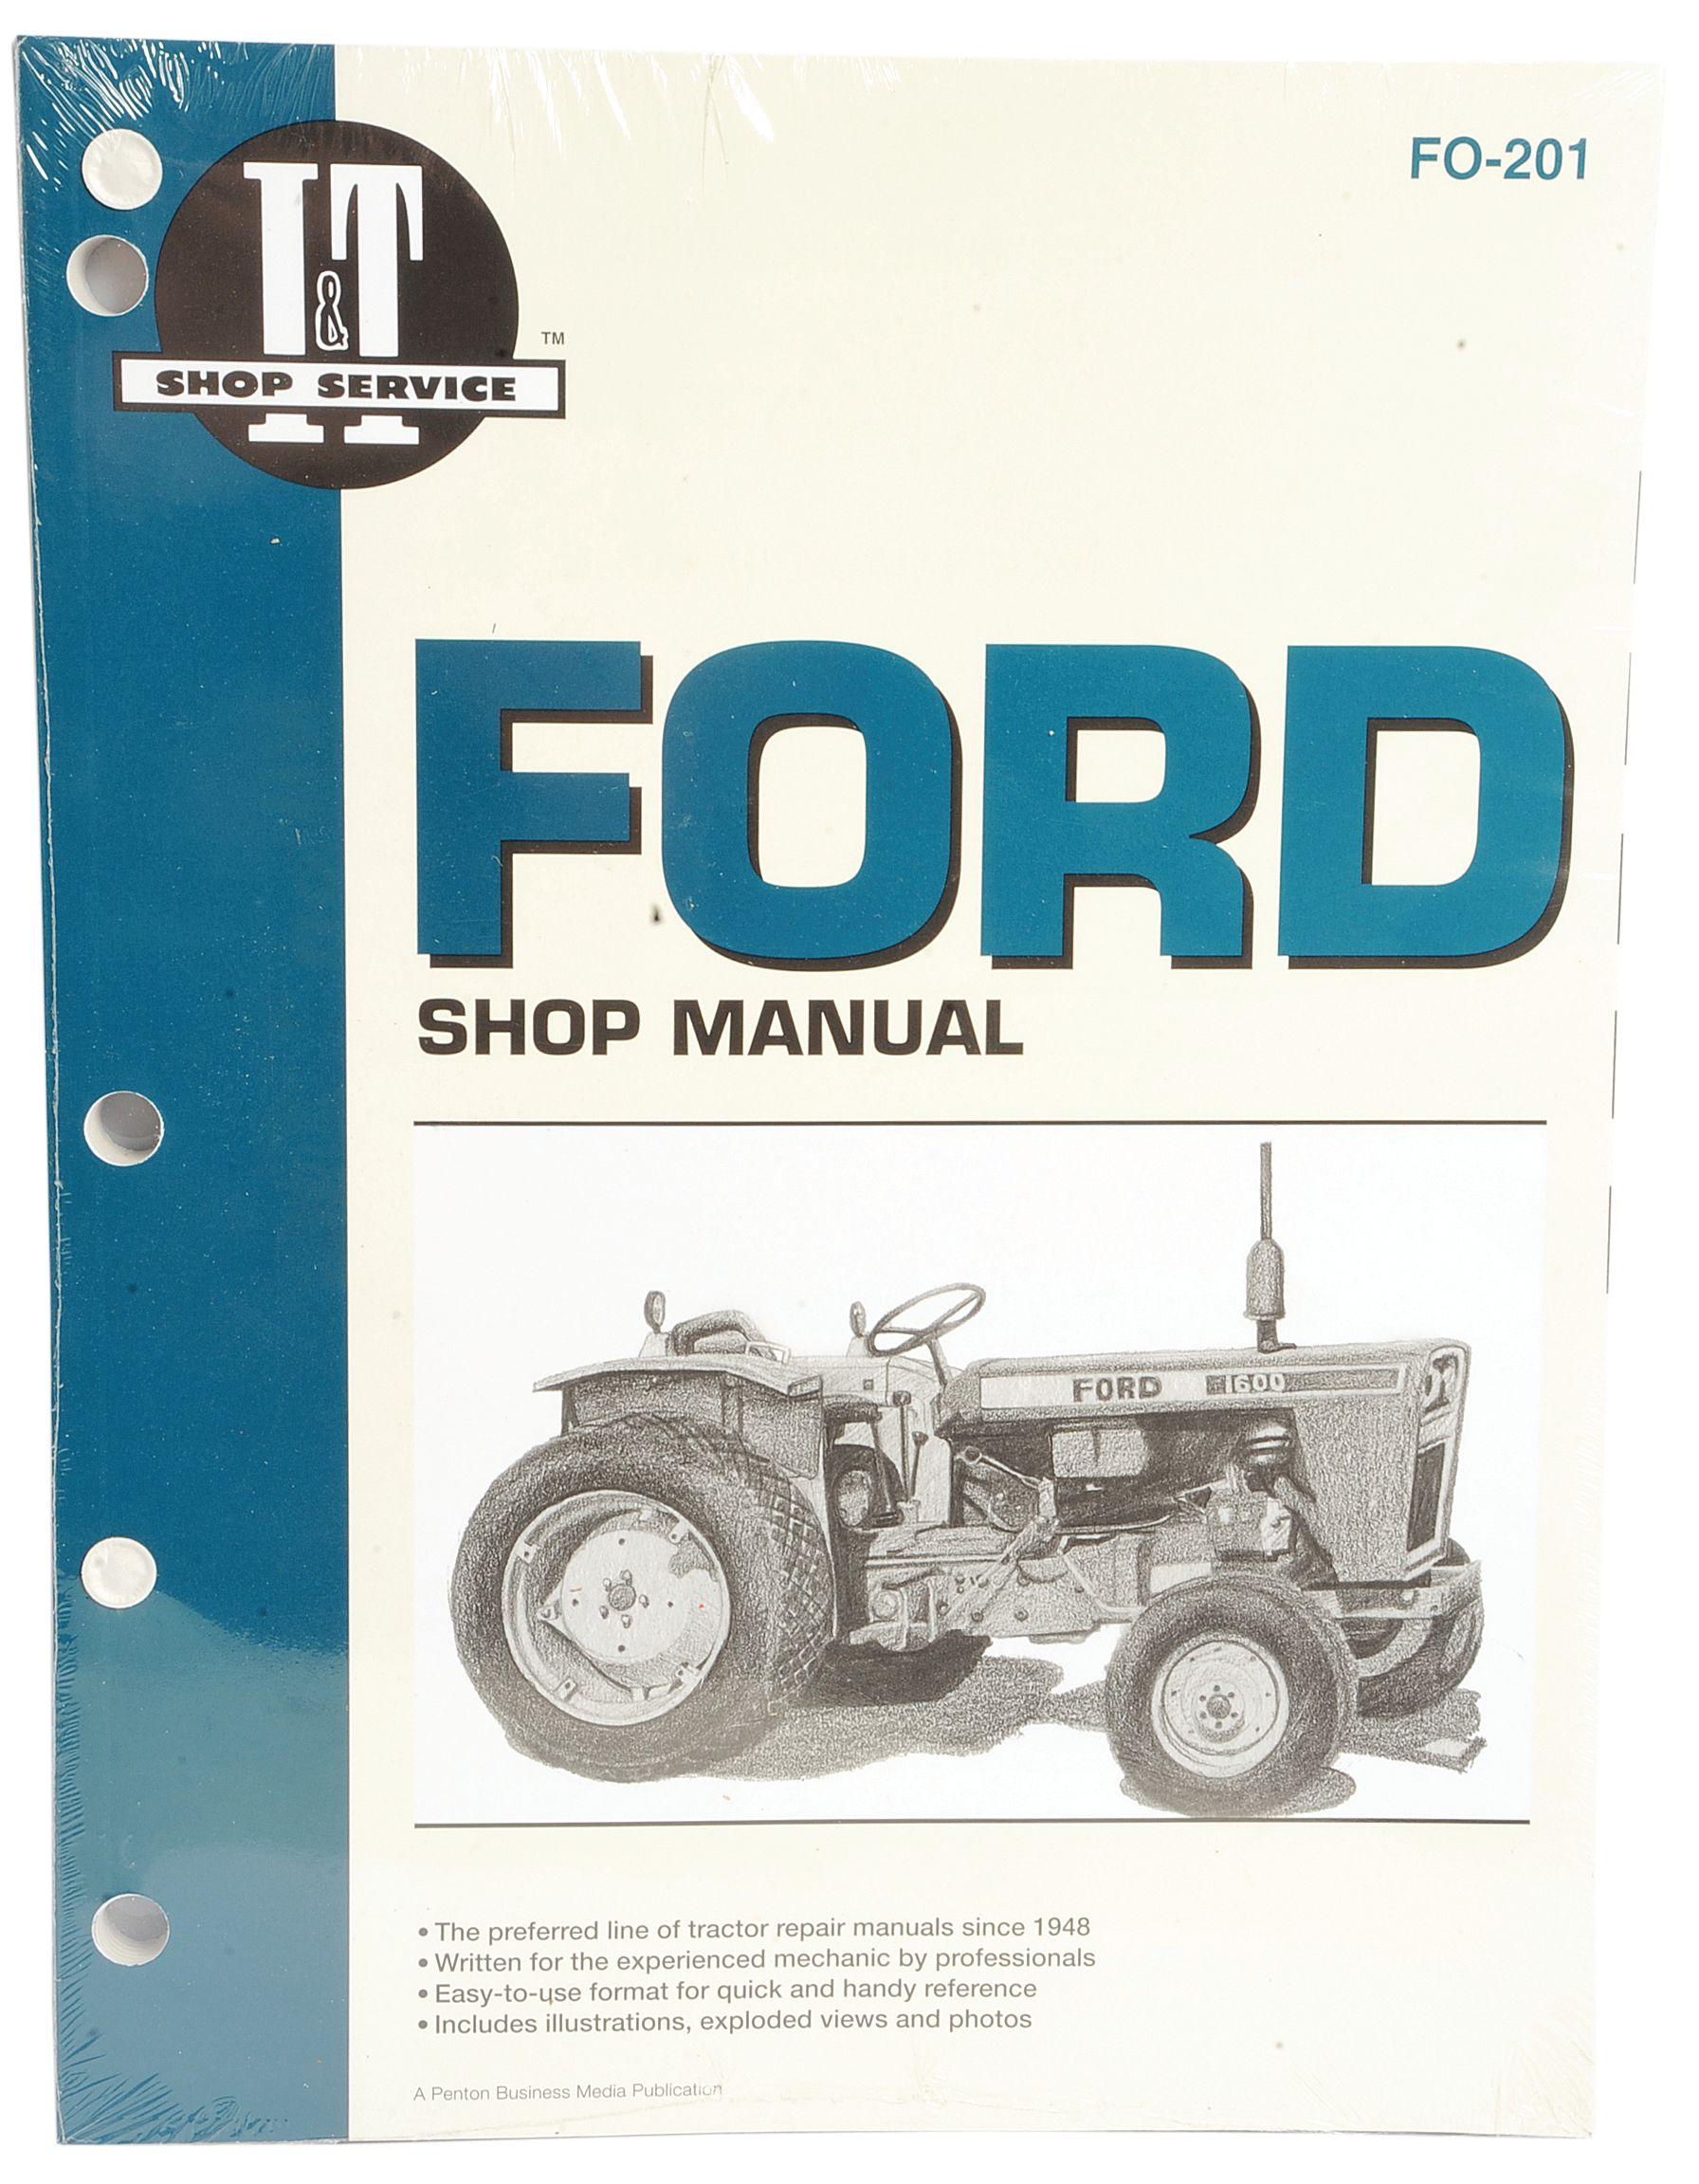 FORD NEW HOLLAND MANUAL-FORD 14222